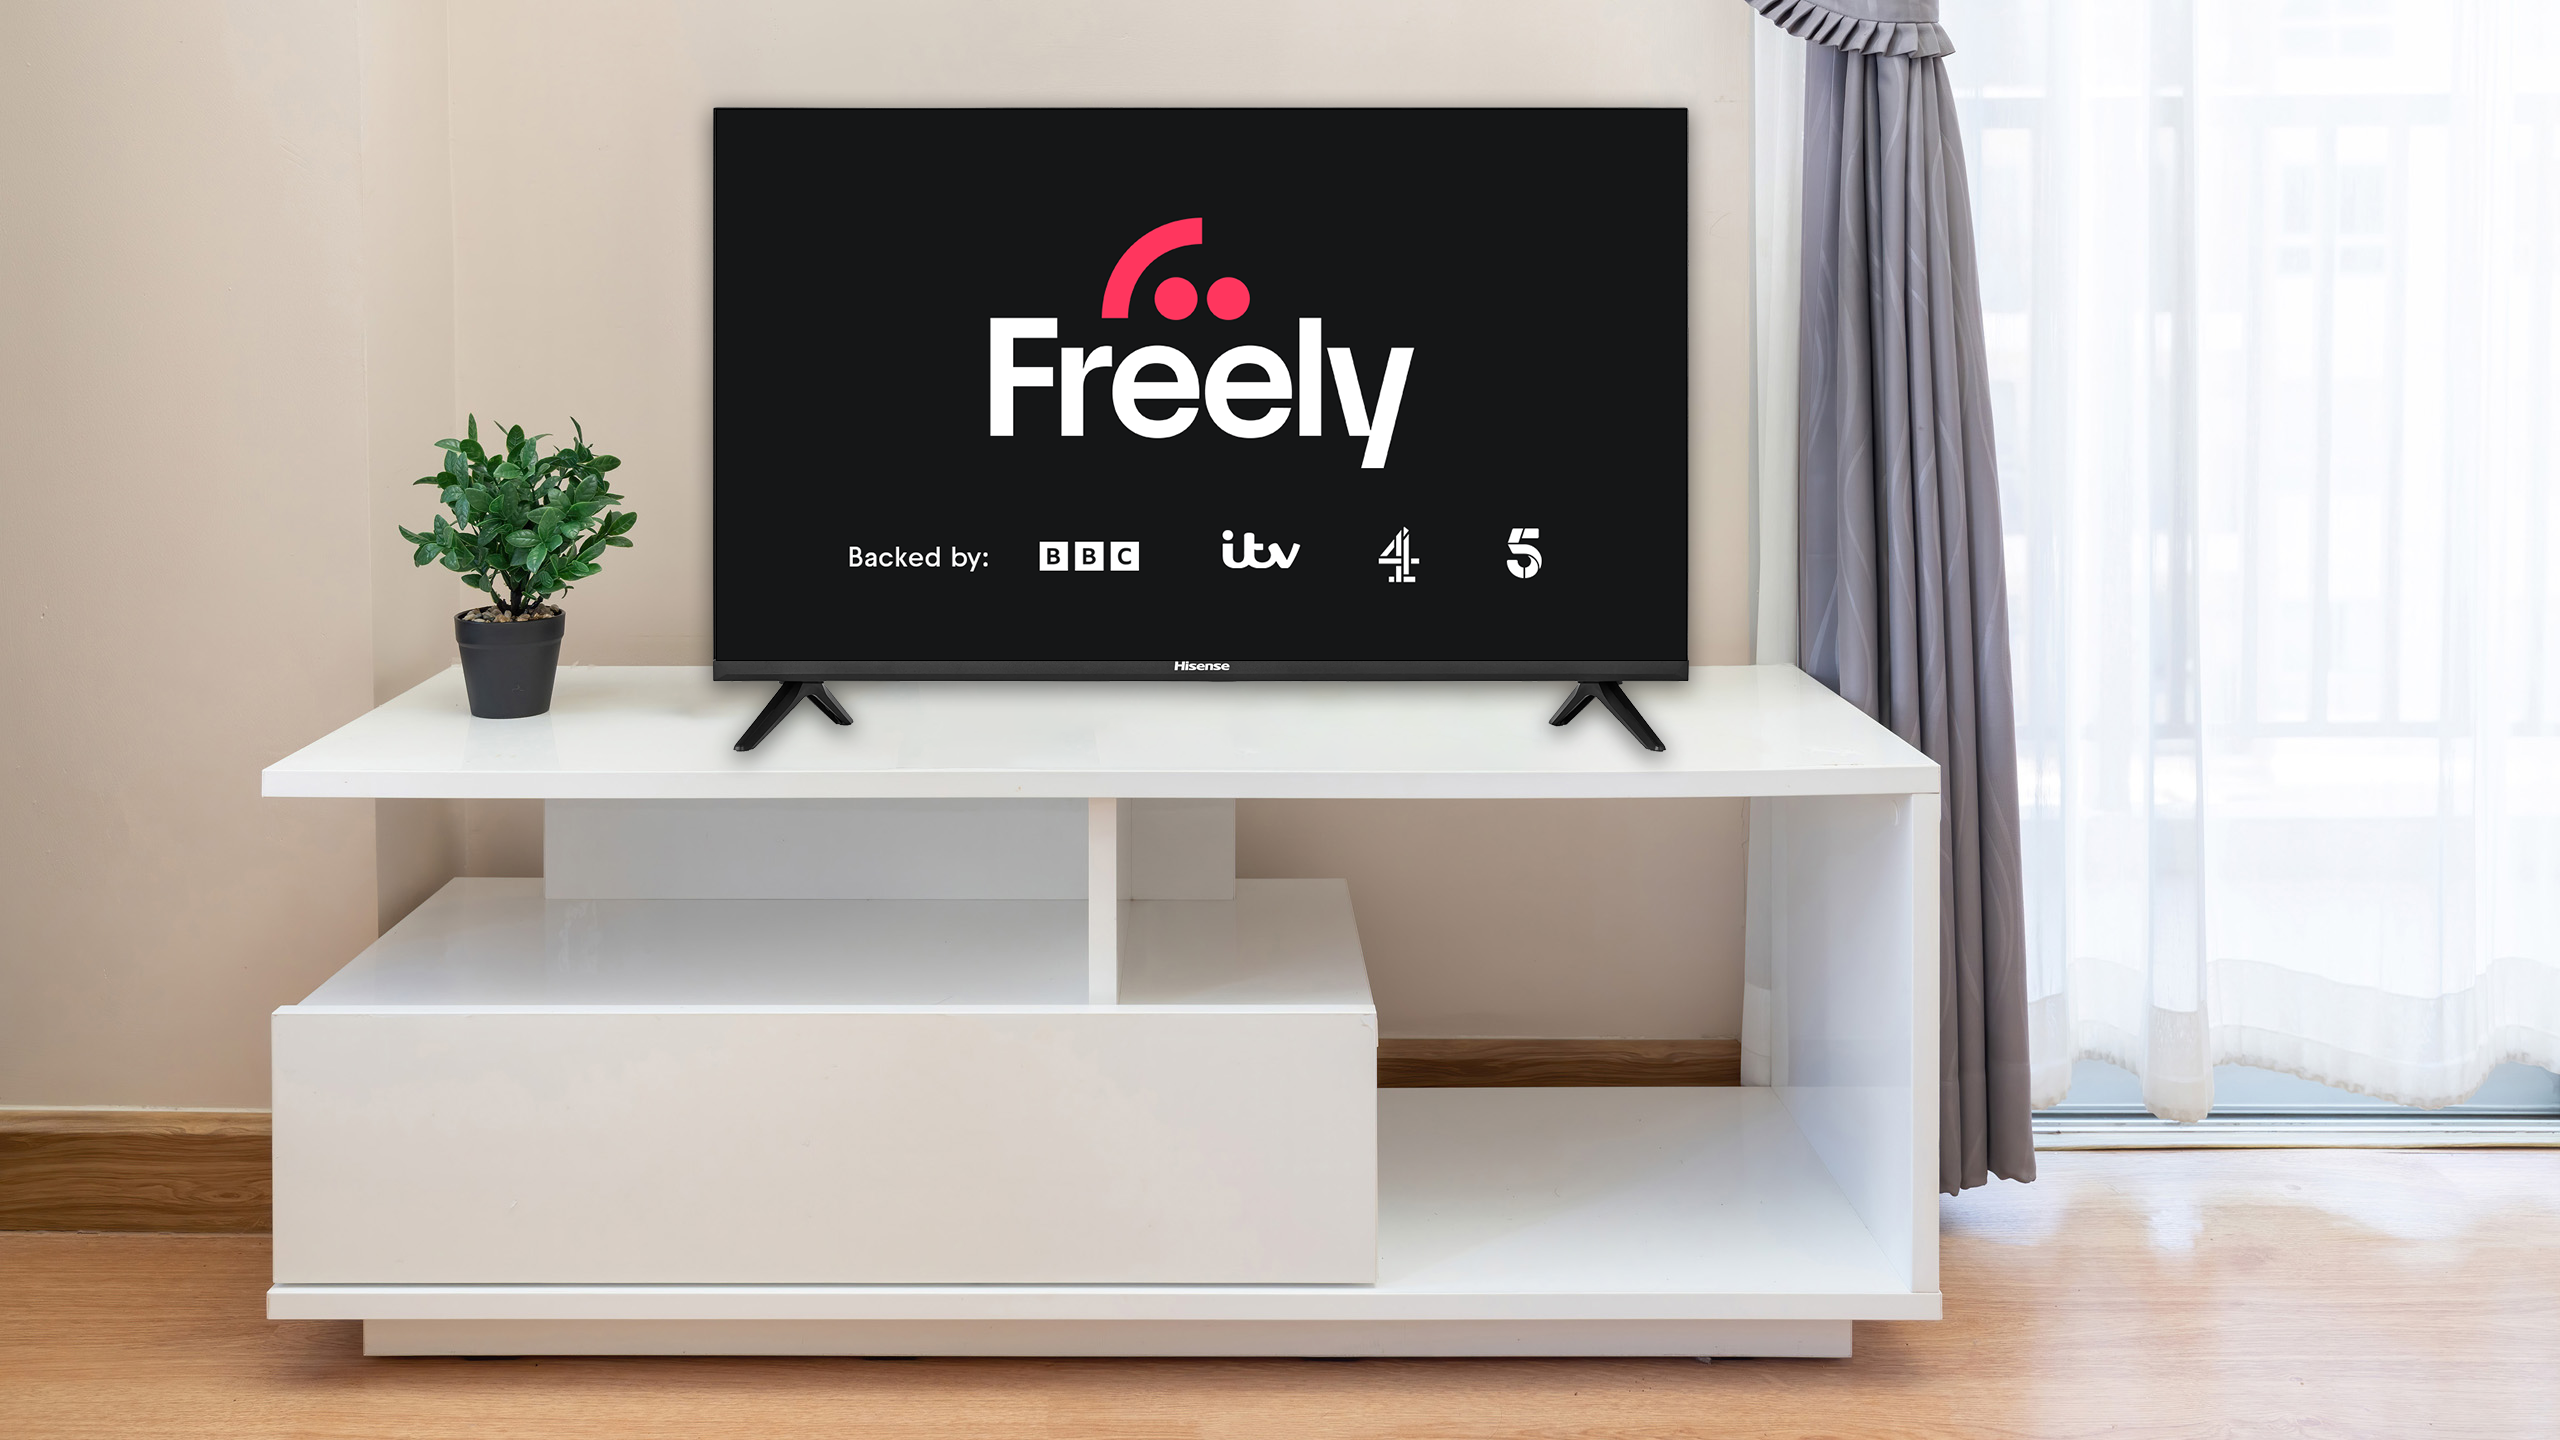 Freely, a Free Streaming Service by Everyone TV, Will Launch This Year